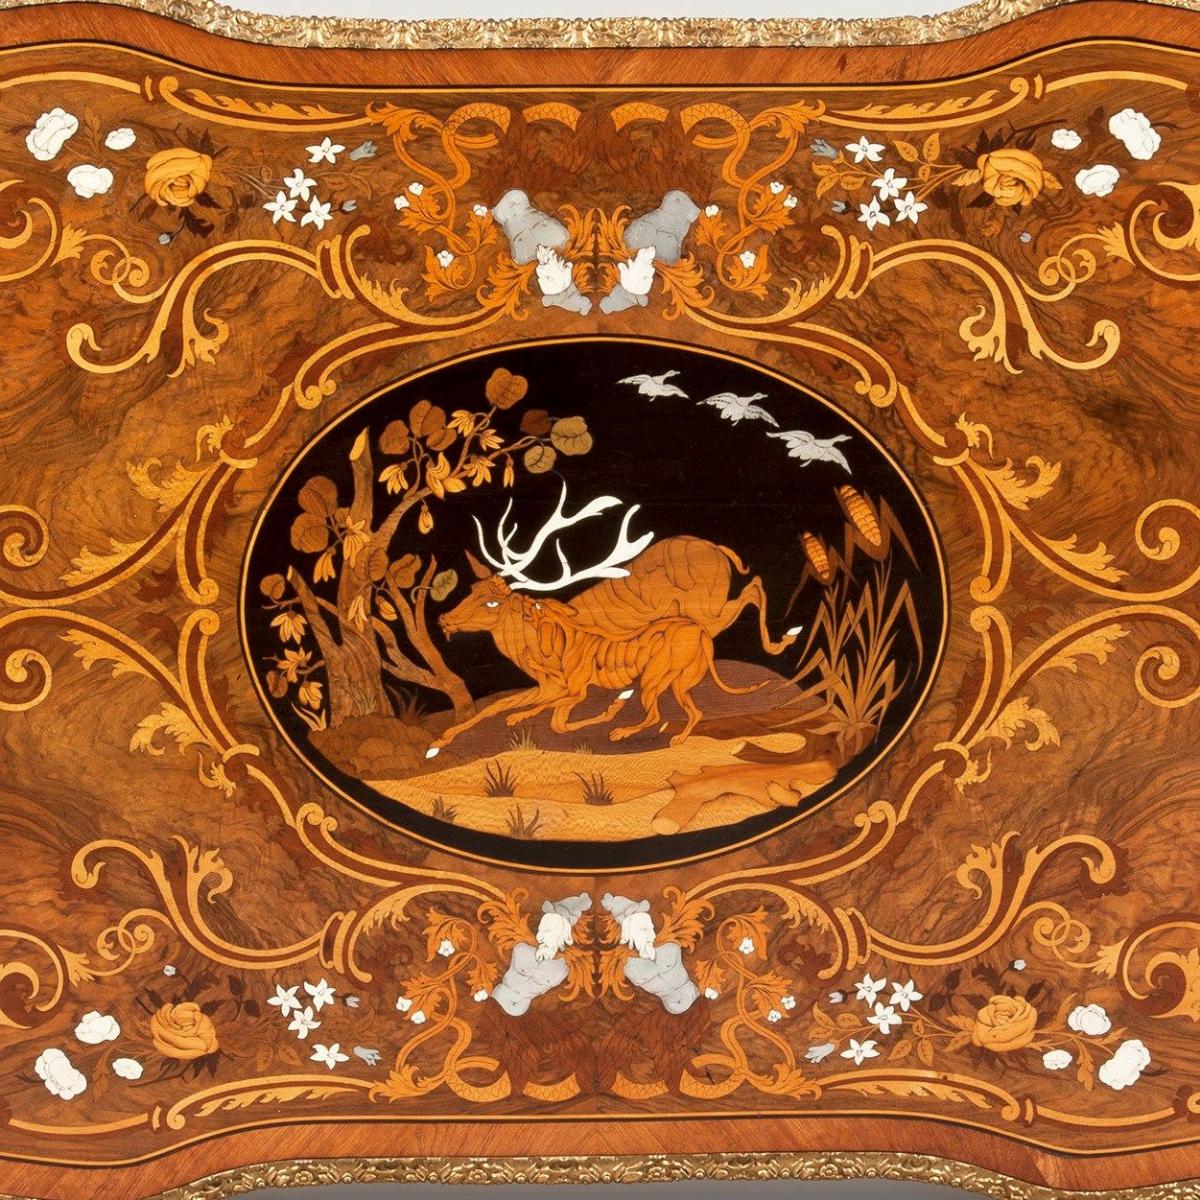 A Marquetry Bureau Plat in the Louis XV Manner